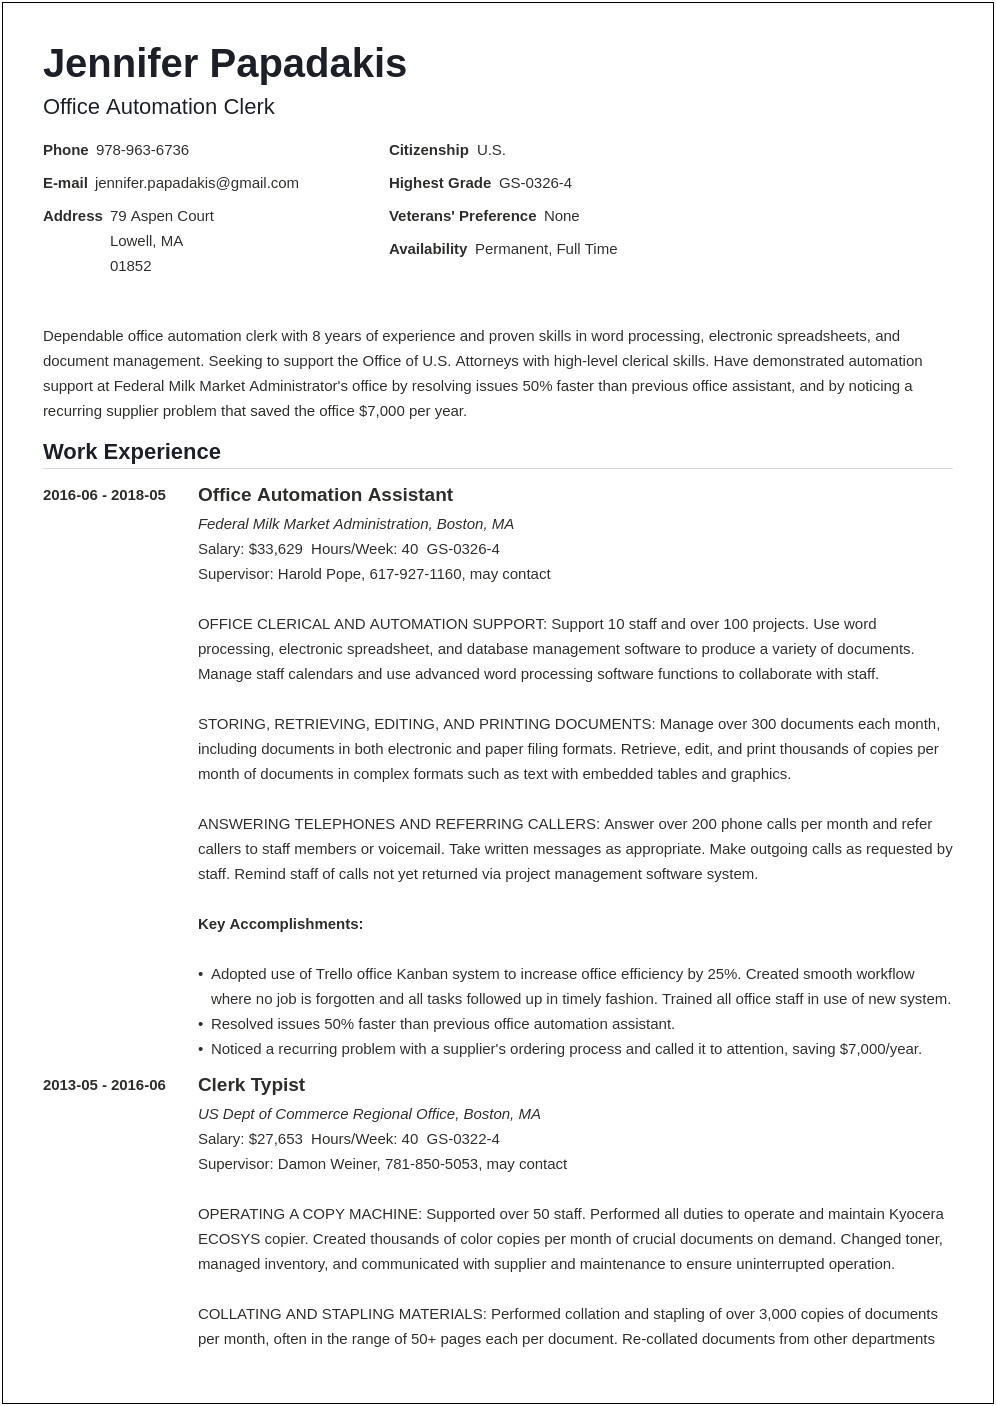 Professional Job Summary For Federal Resume